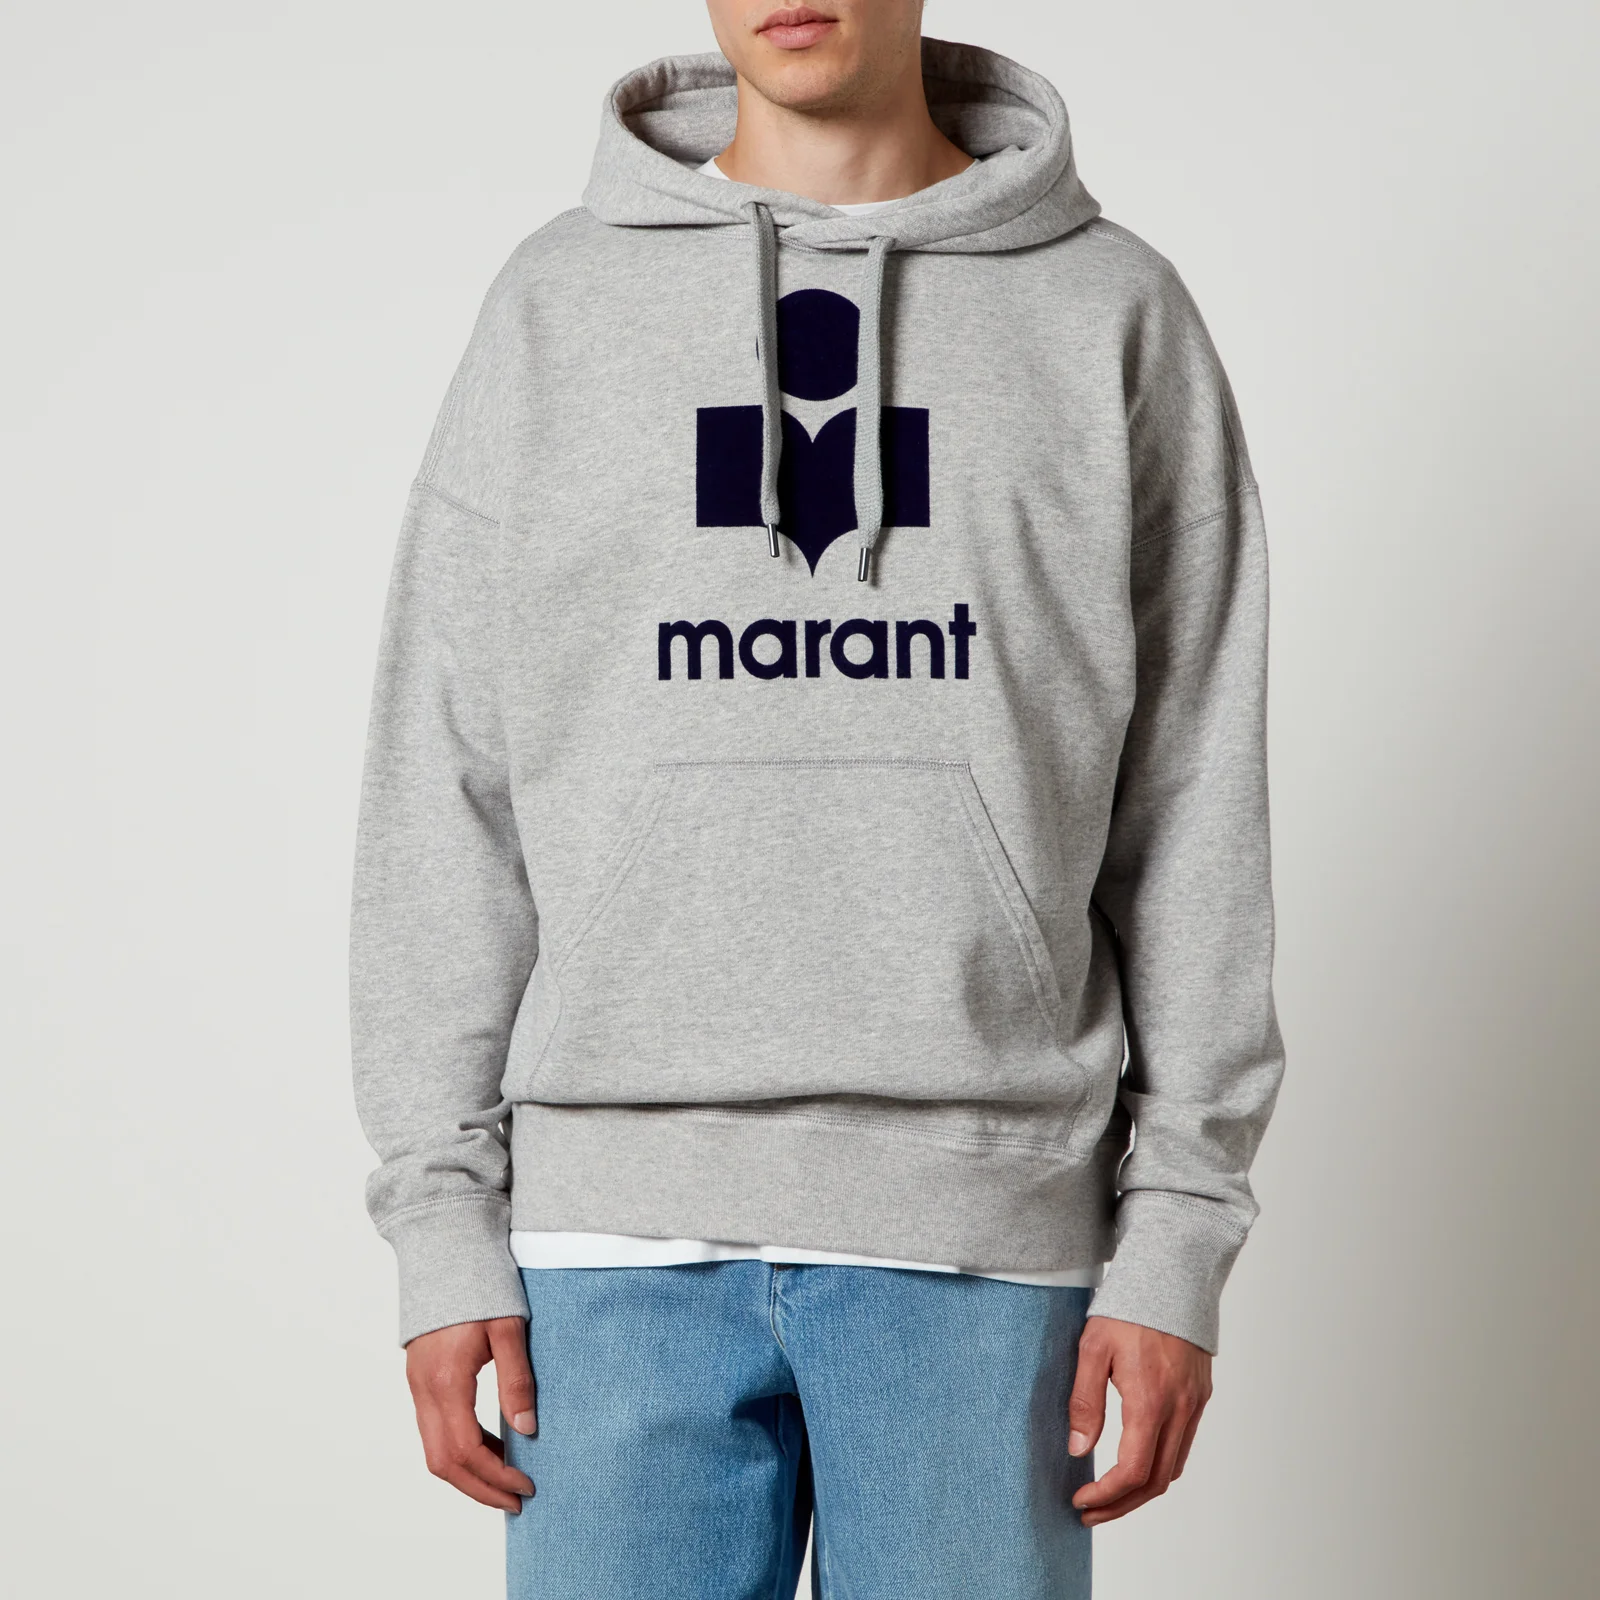 MARANT Miley Loopback Cotton-Blend Jersey Hoodie Image 1